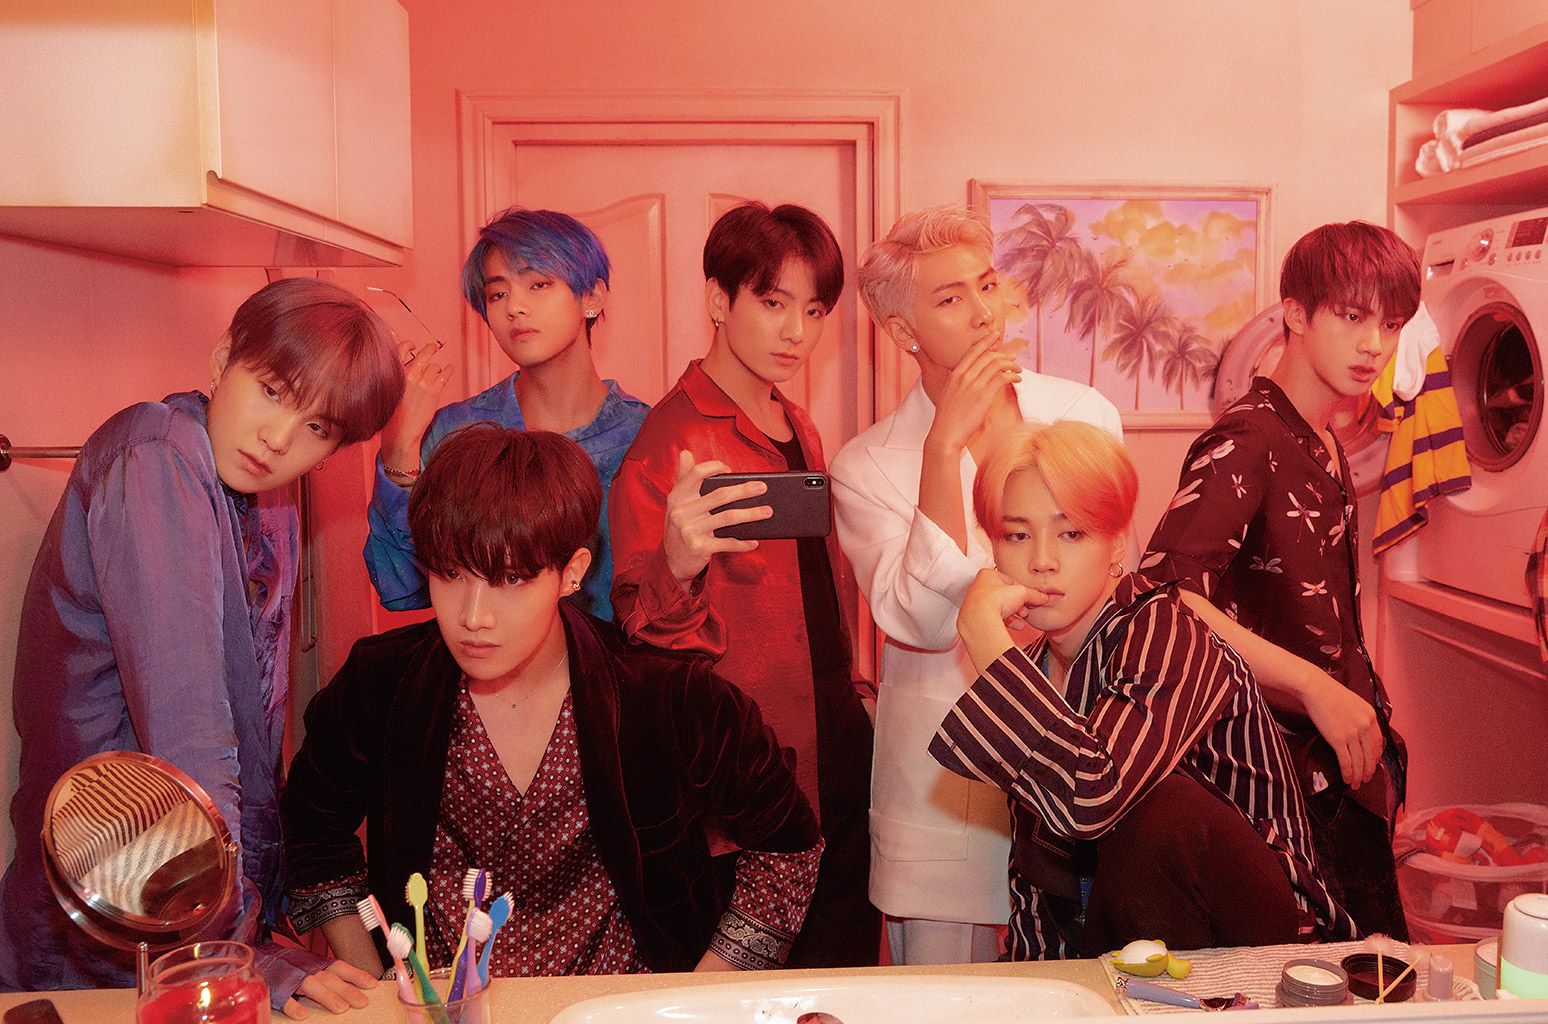 BTS Release Version 3 & 4 of 'Map of the Soul: Persona' Concept